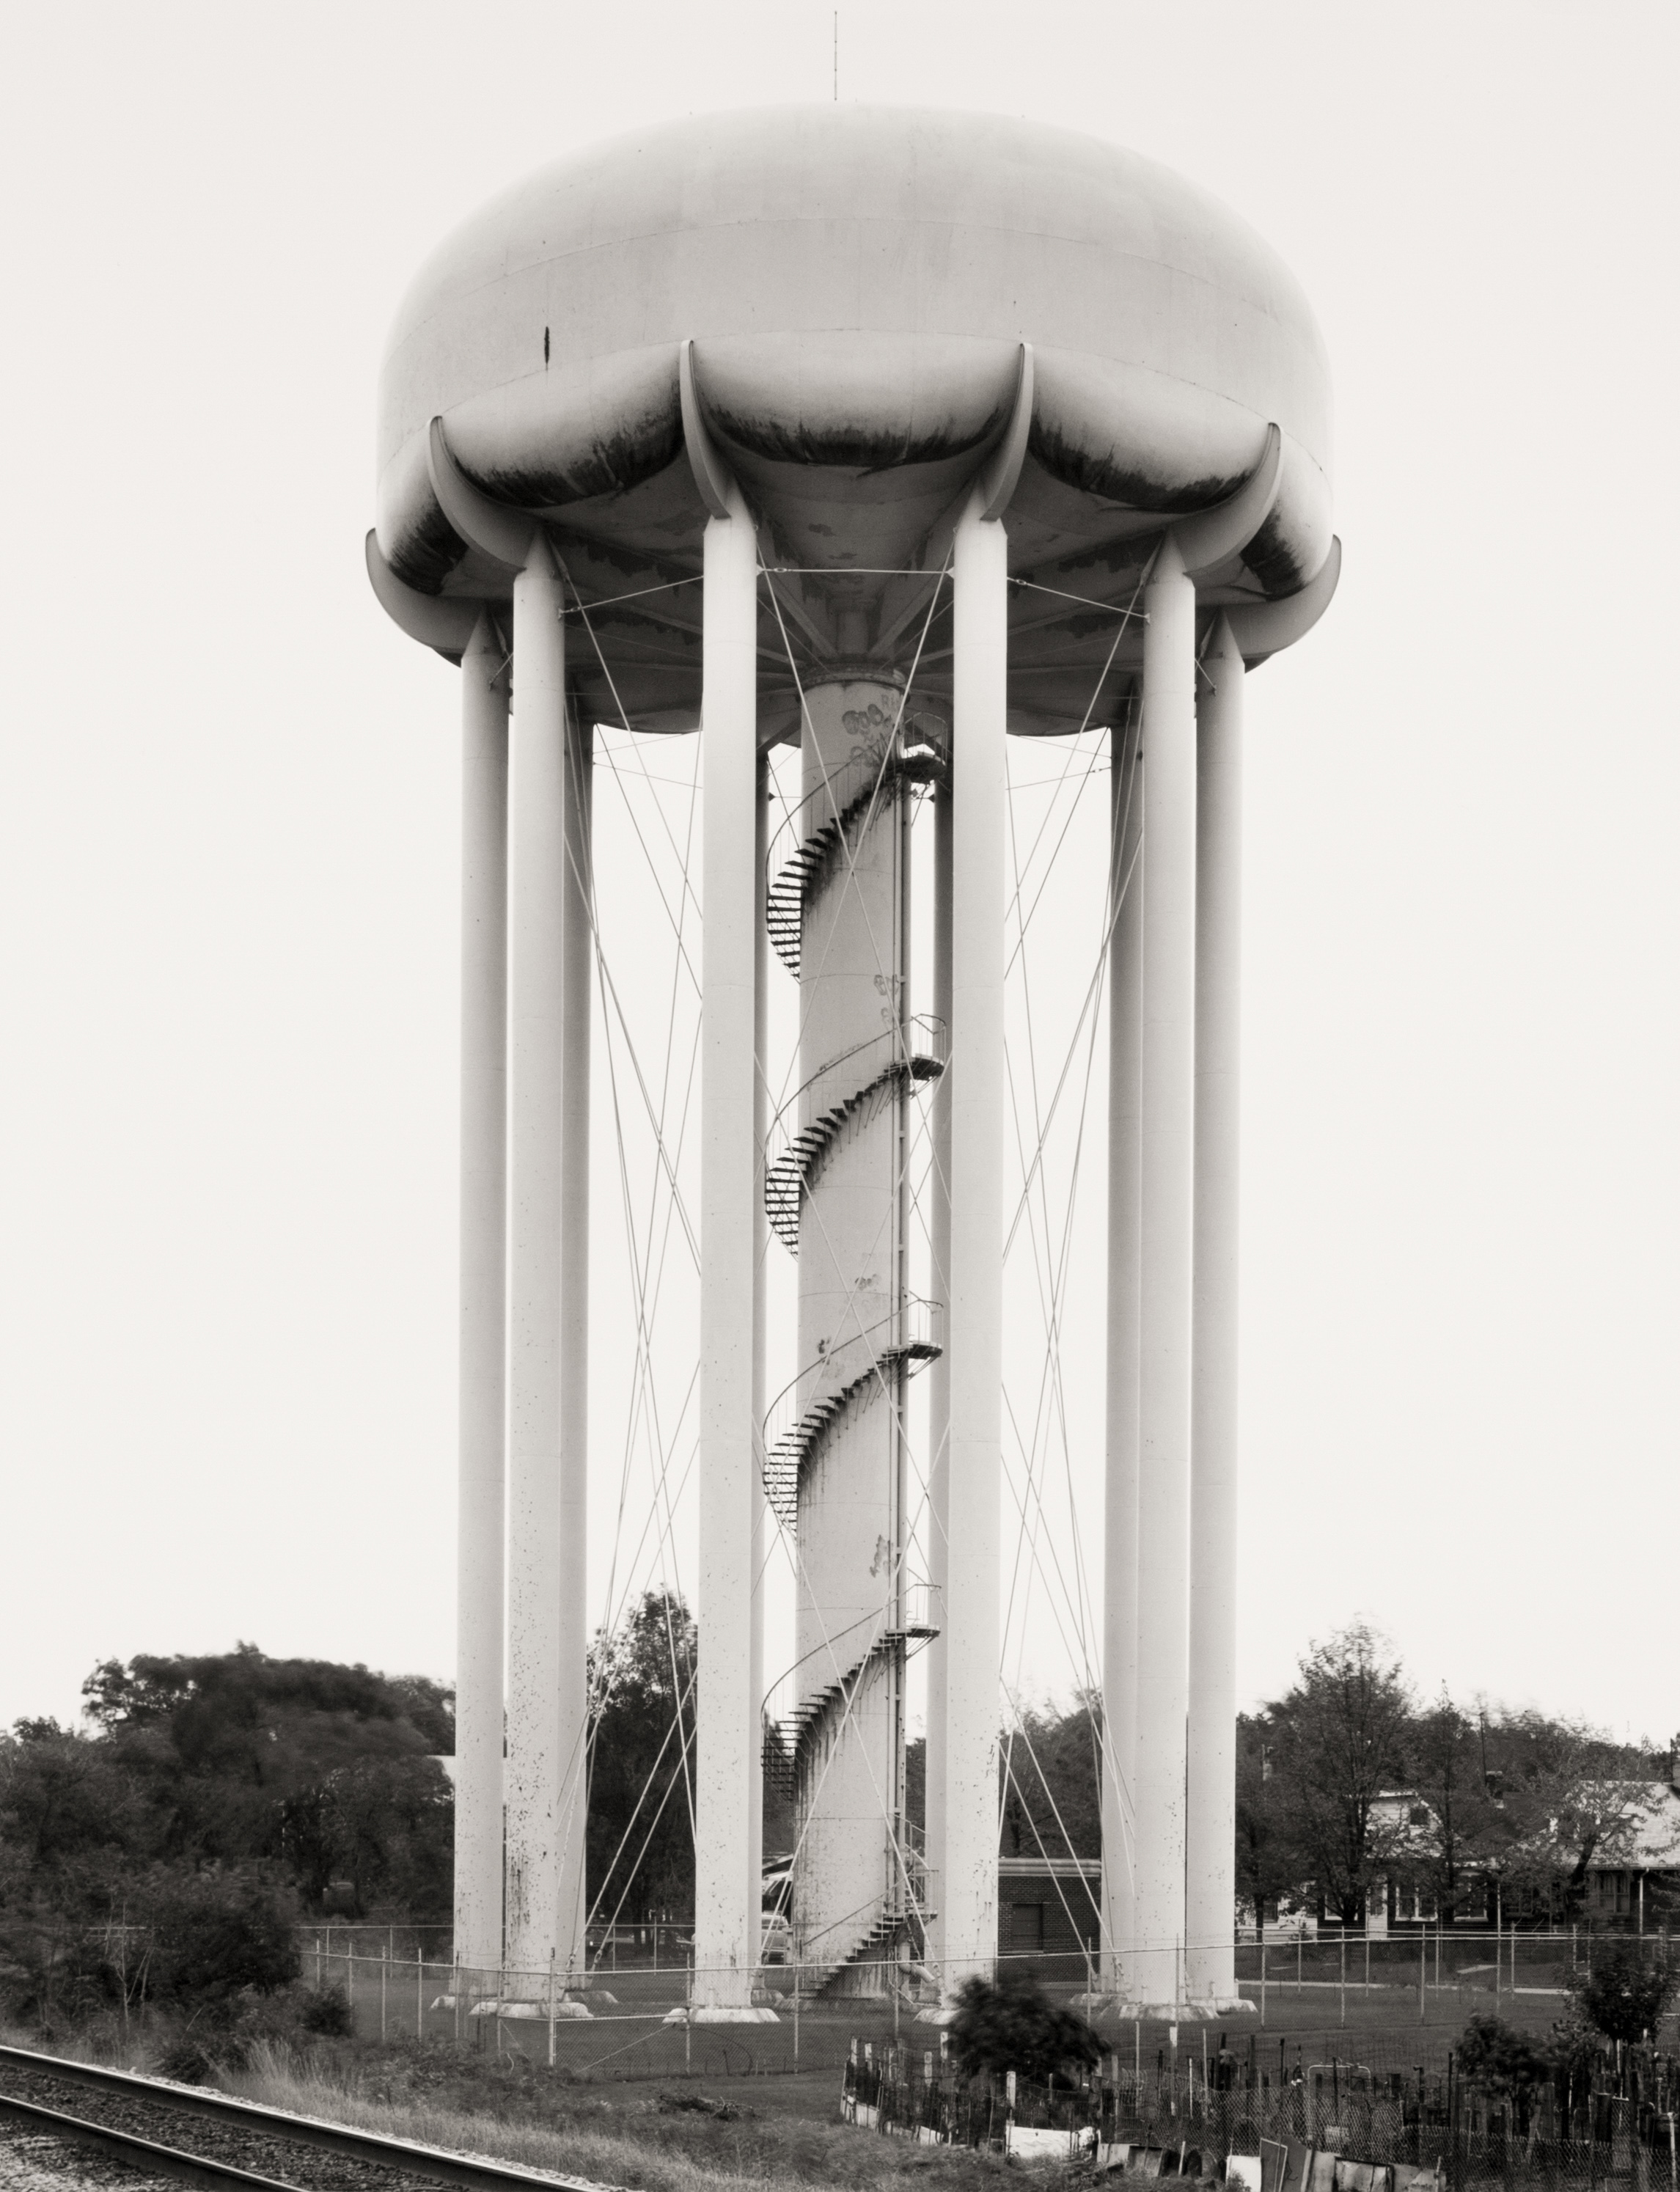 Black and white photograph of a water tower near a railroad track and residential homes